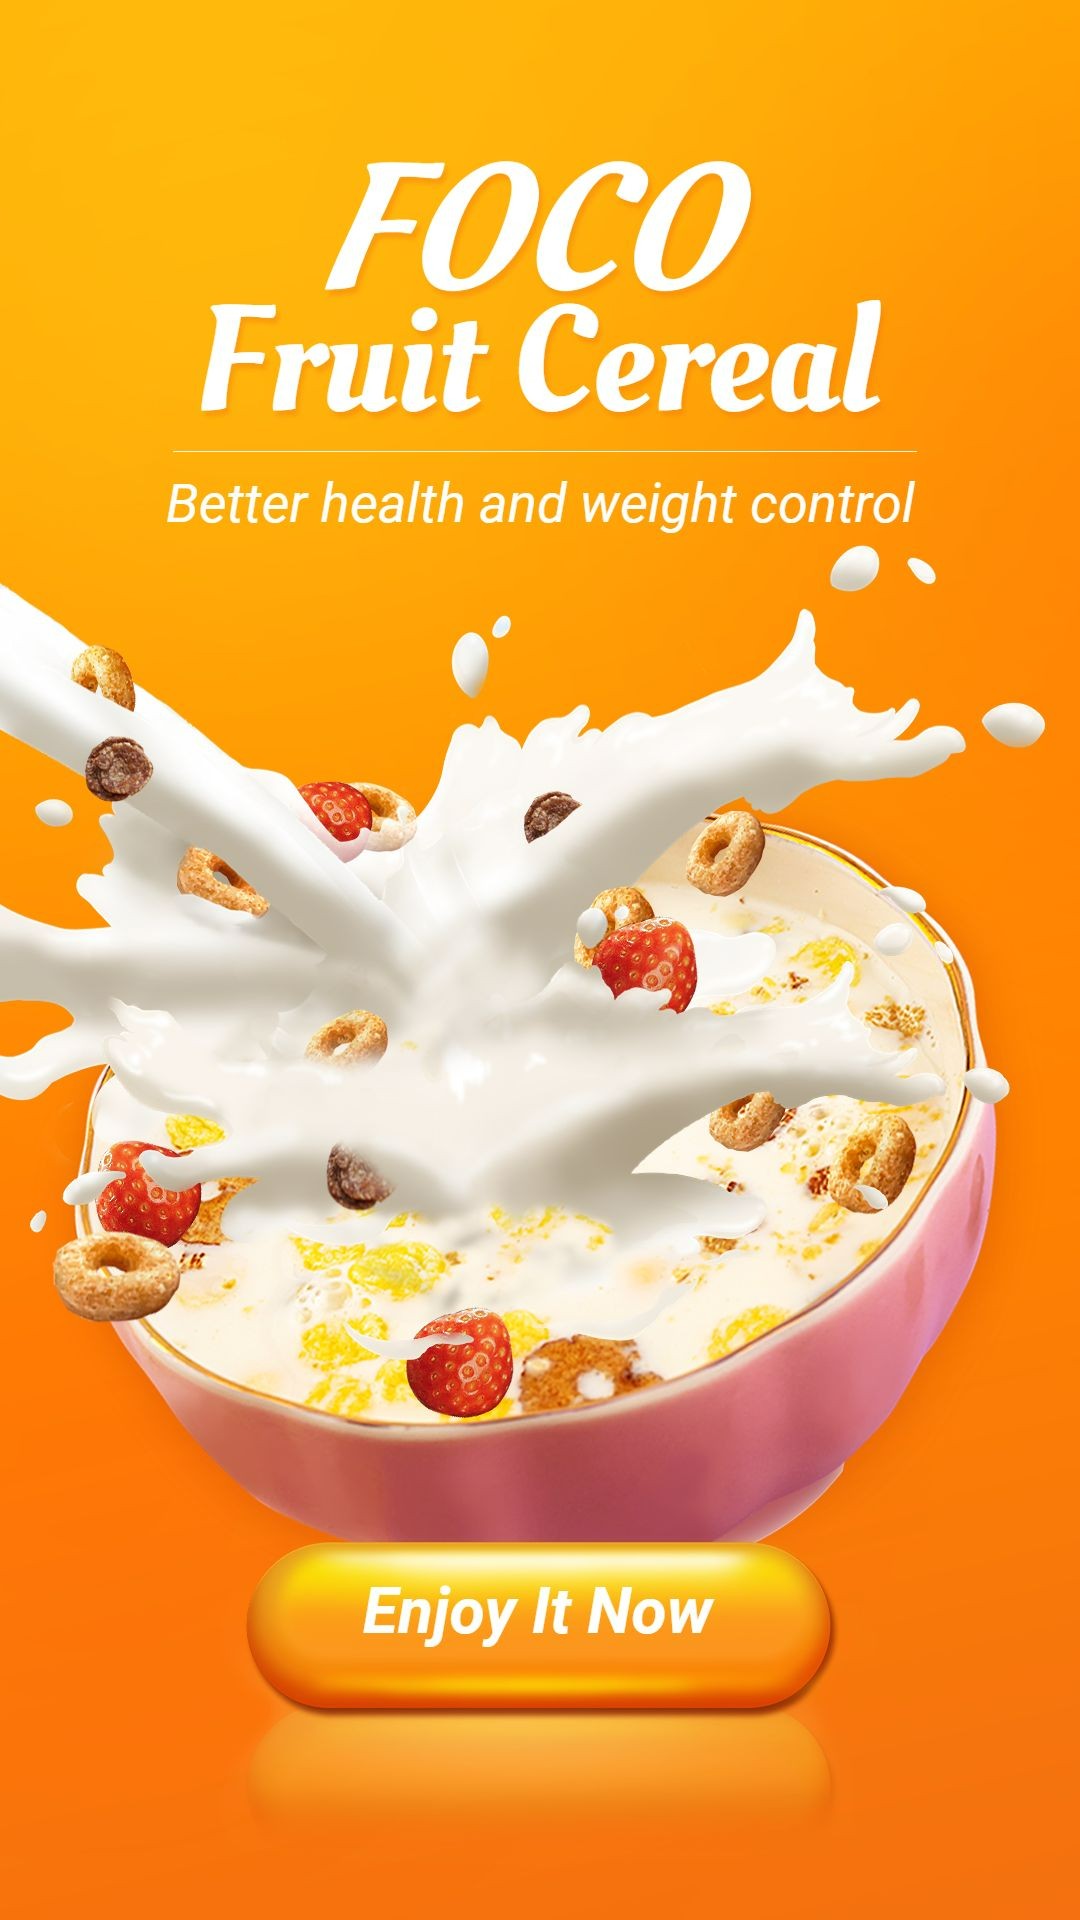 Breakfast Cereal Healthy Snacks Consumer Packaged Food and Groceries Promo Ecommerce Story